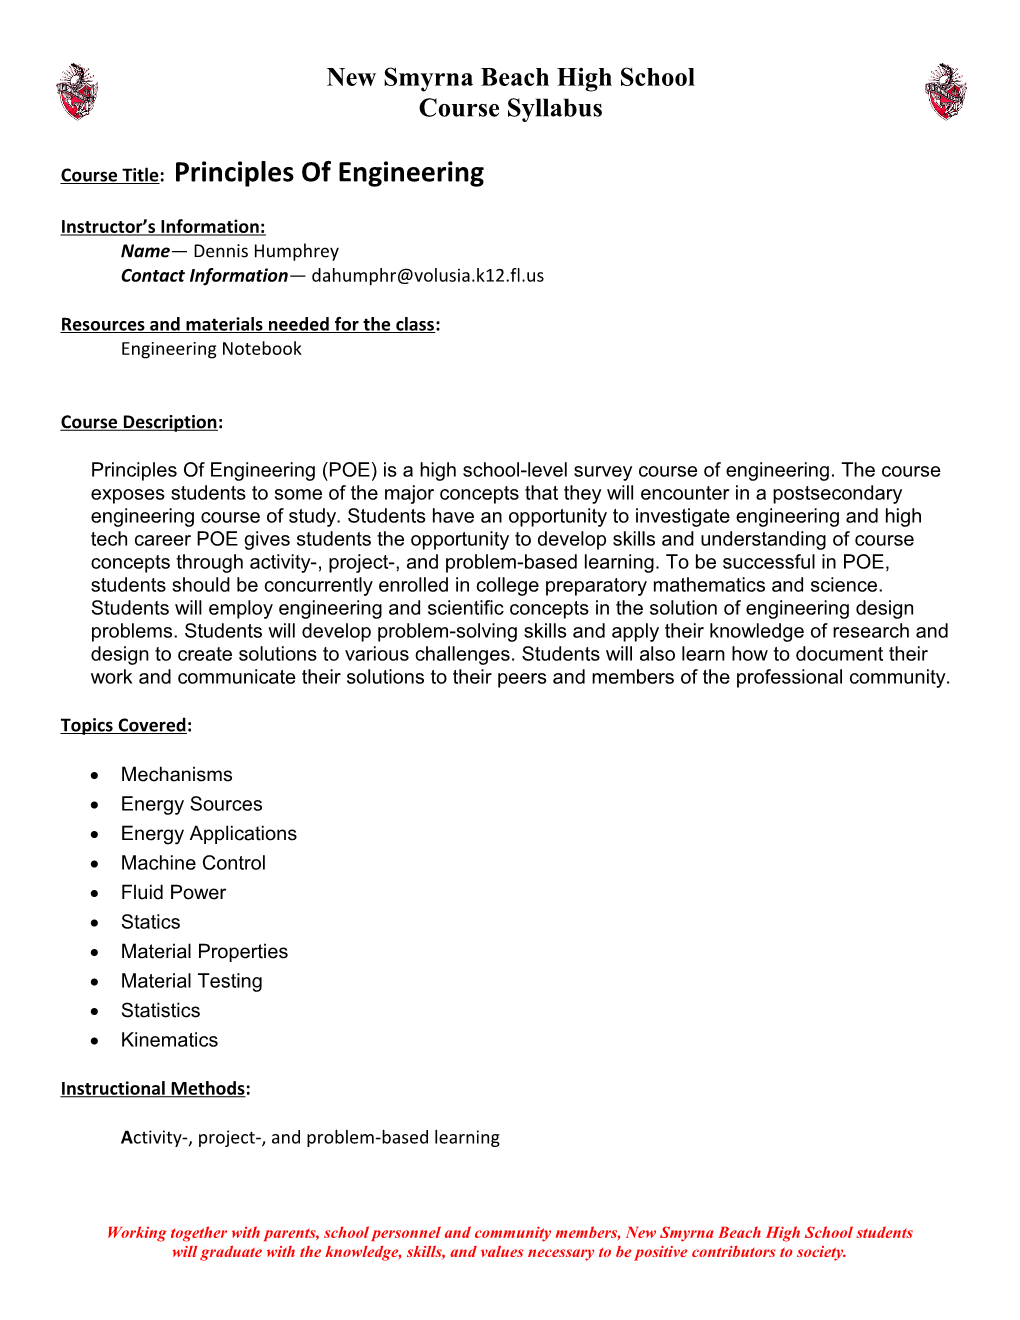 Course Title: Principles of Engineering